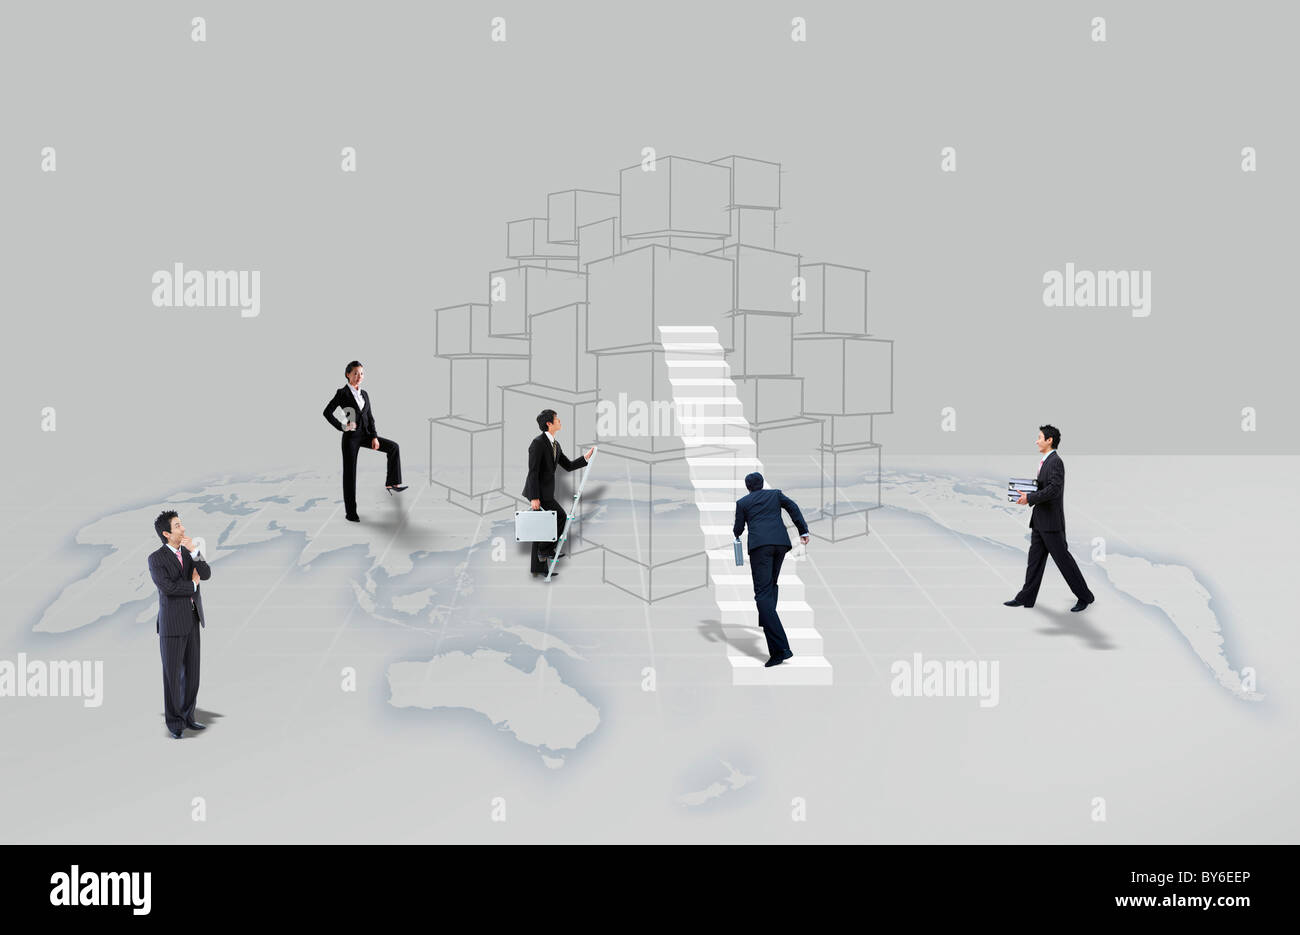 global business grows Stock Photo